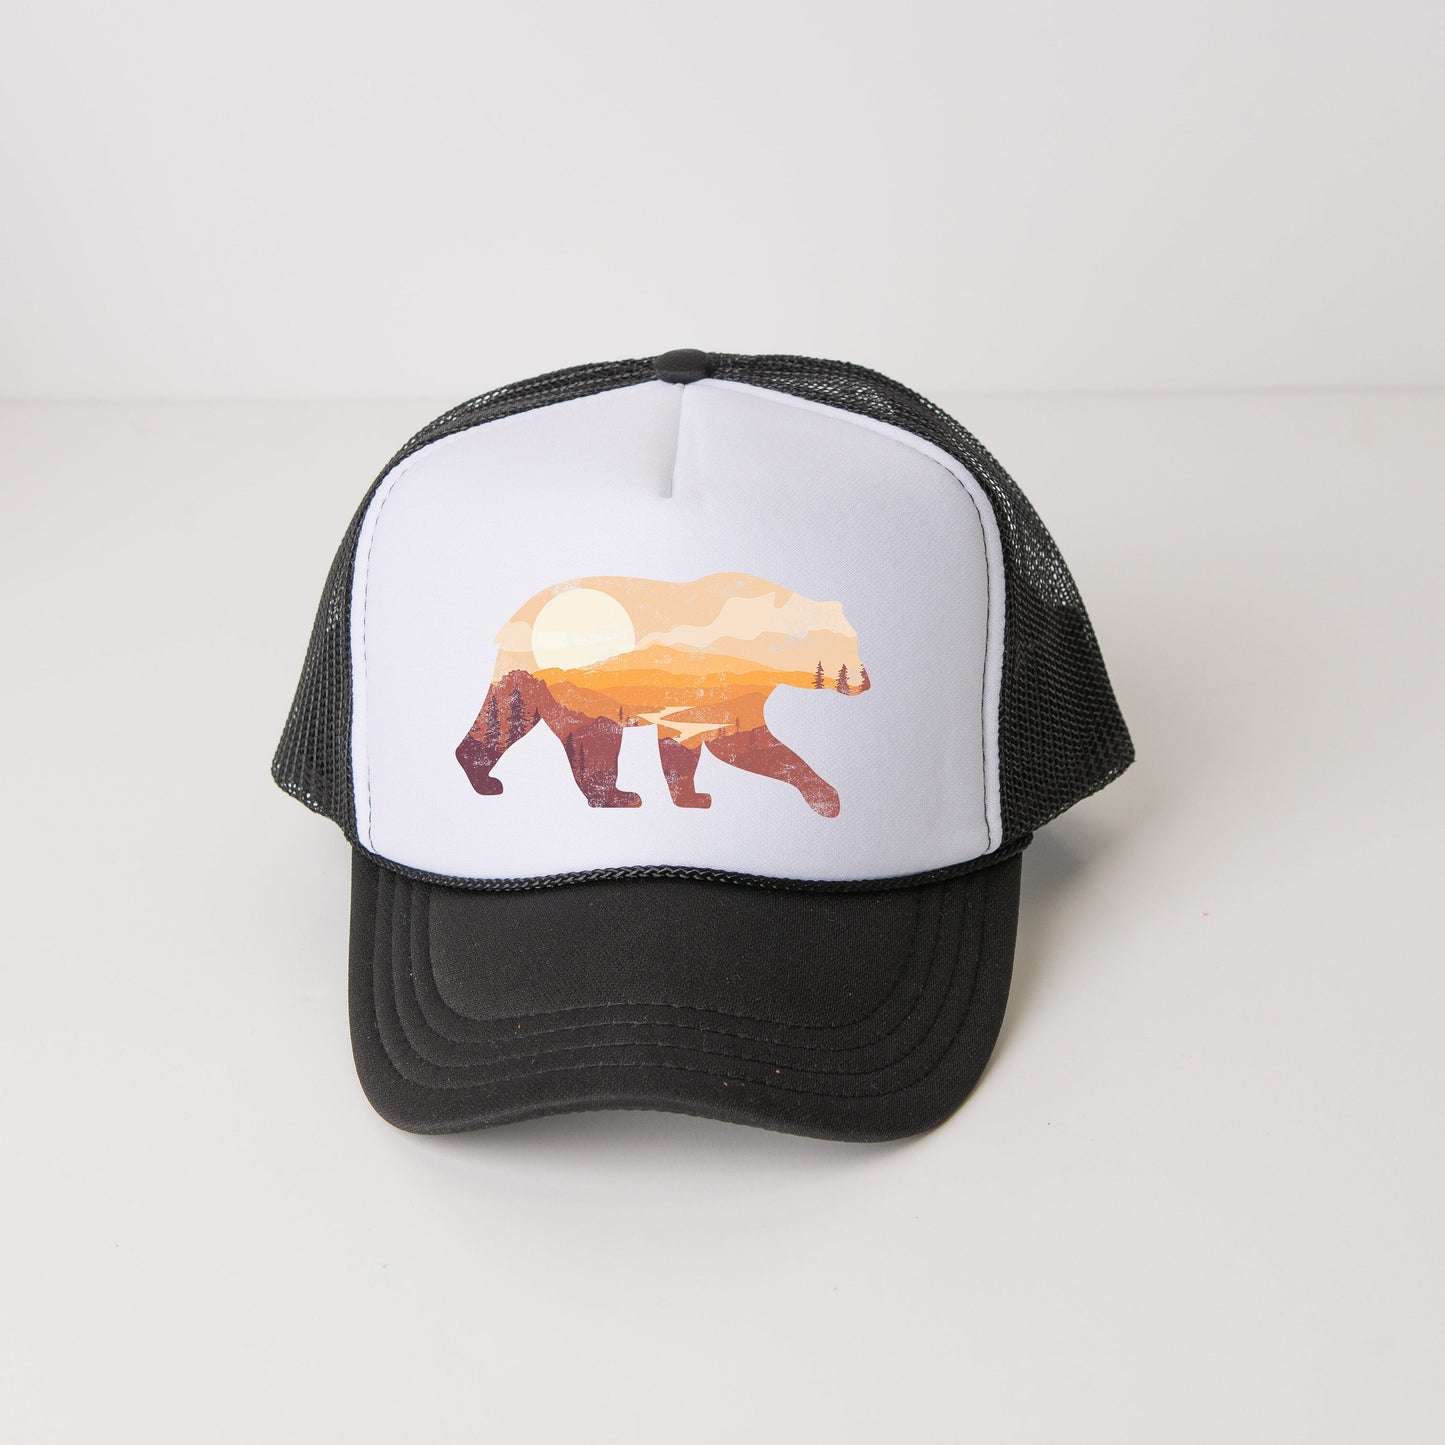 a black and white hat with a bear on it